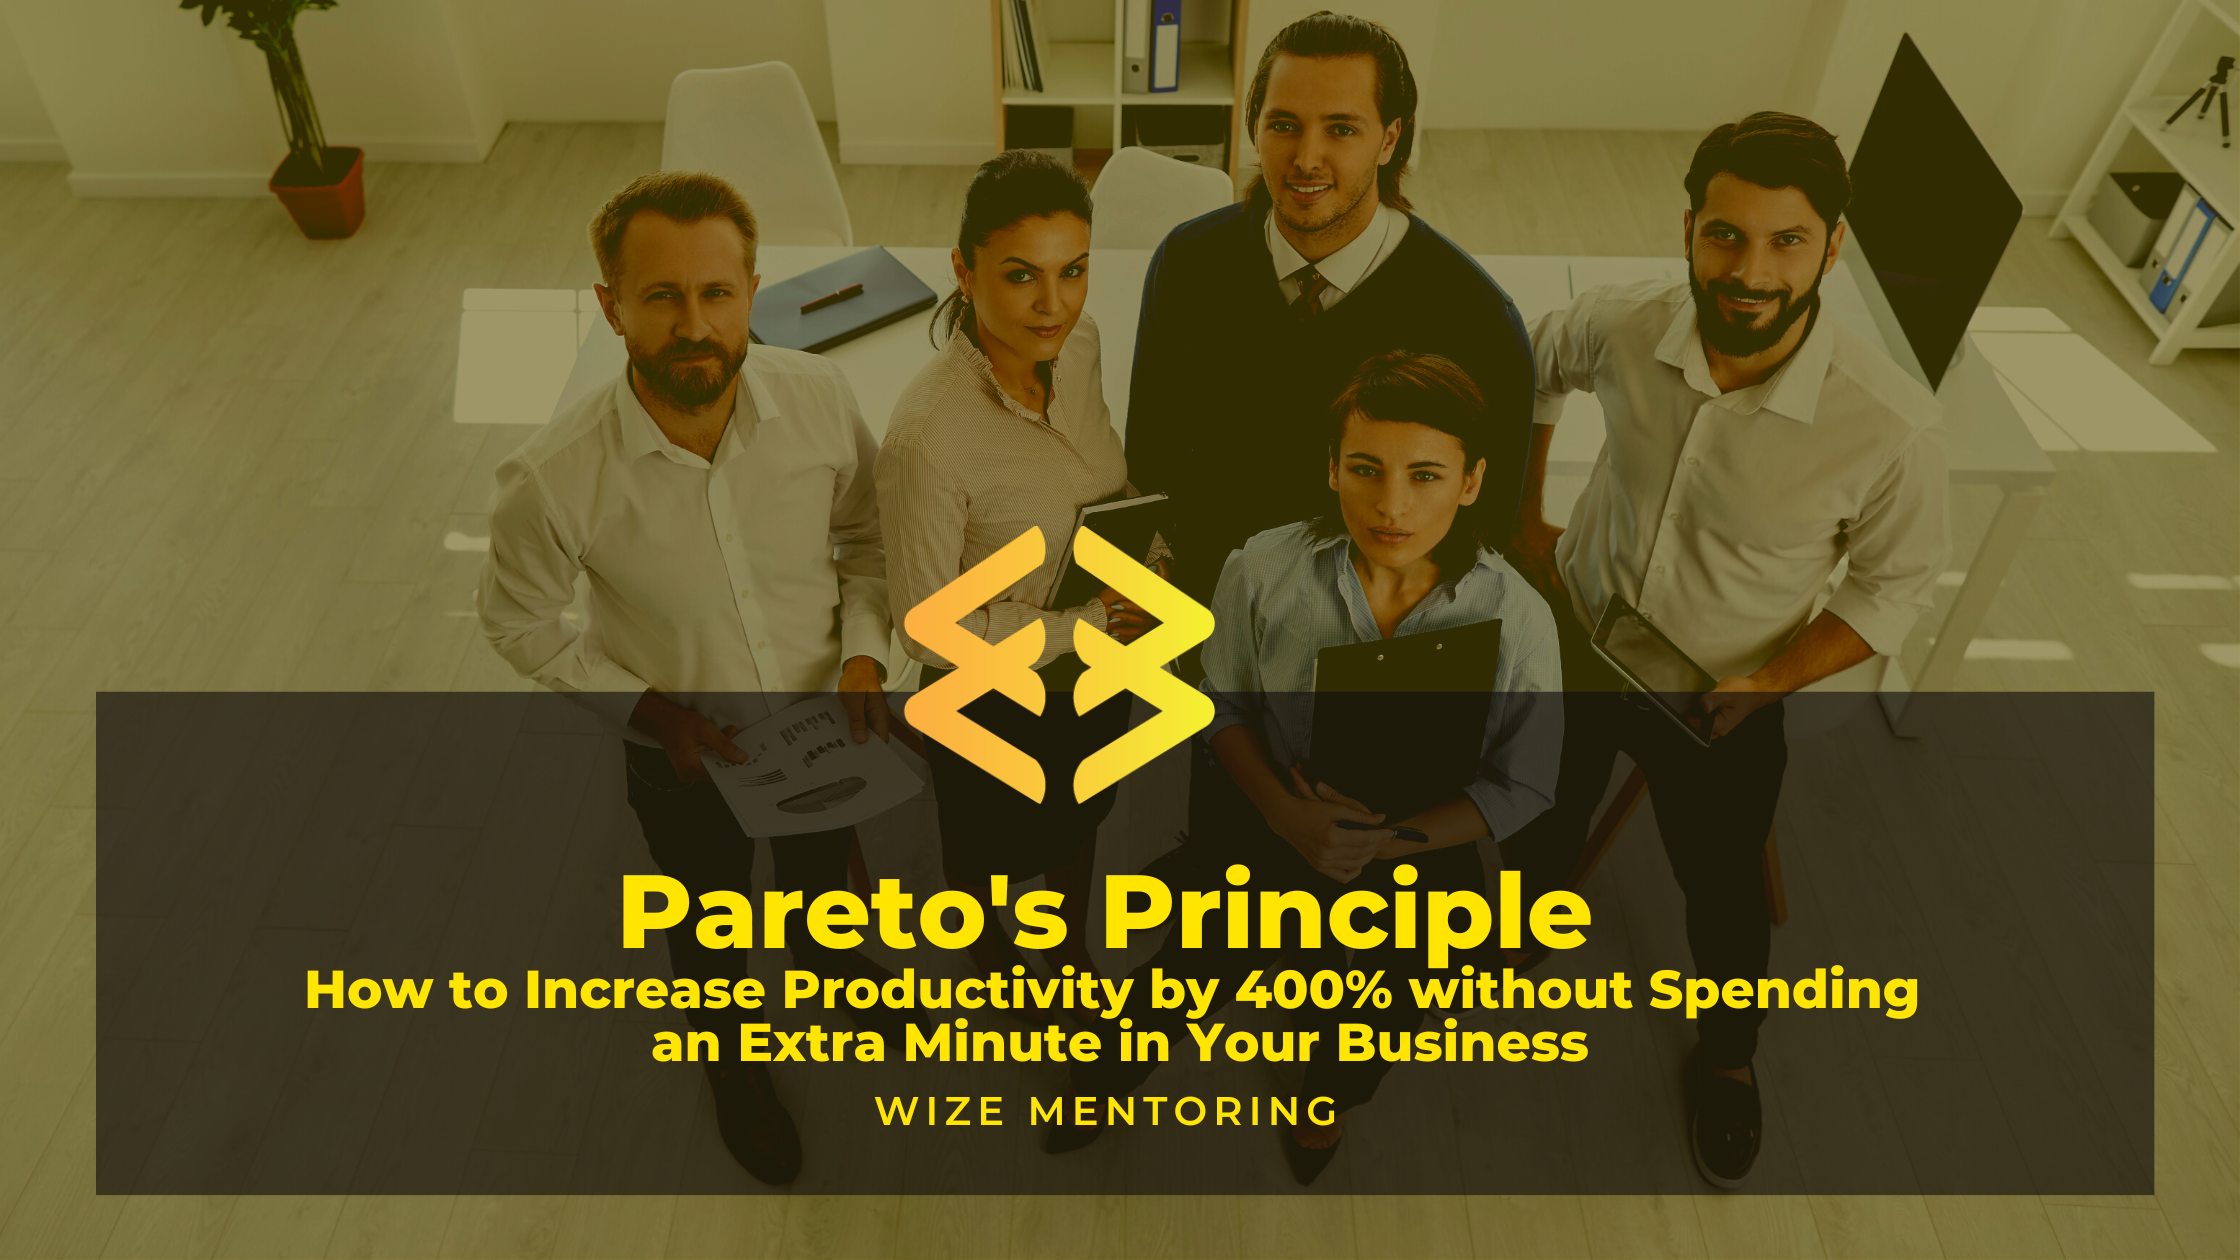 Pareto's Principle – How to Increase Productivity by 400% without spending an Extra Minute in Your Business